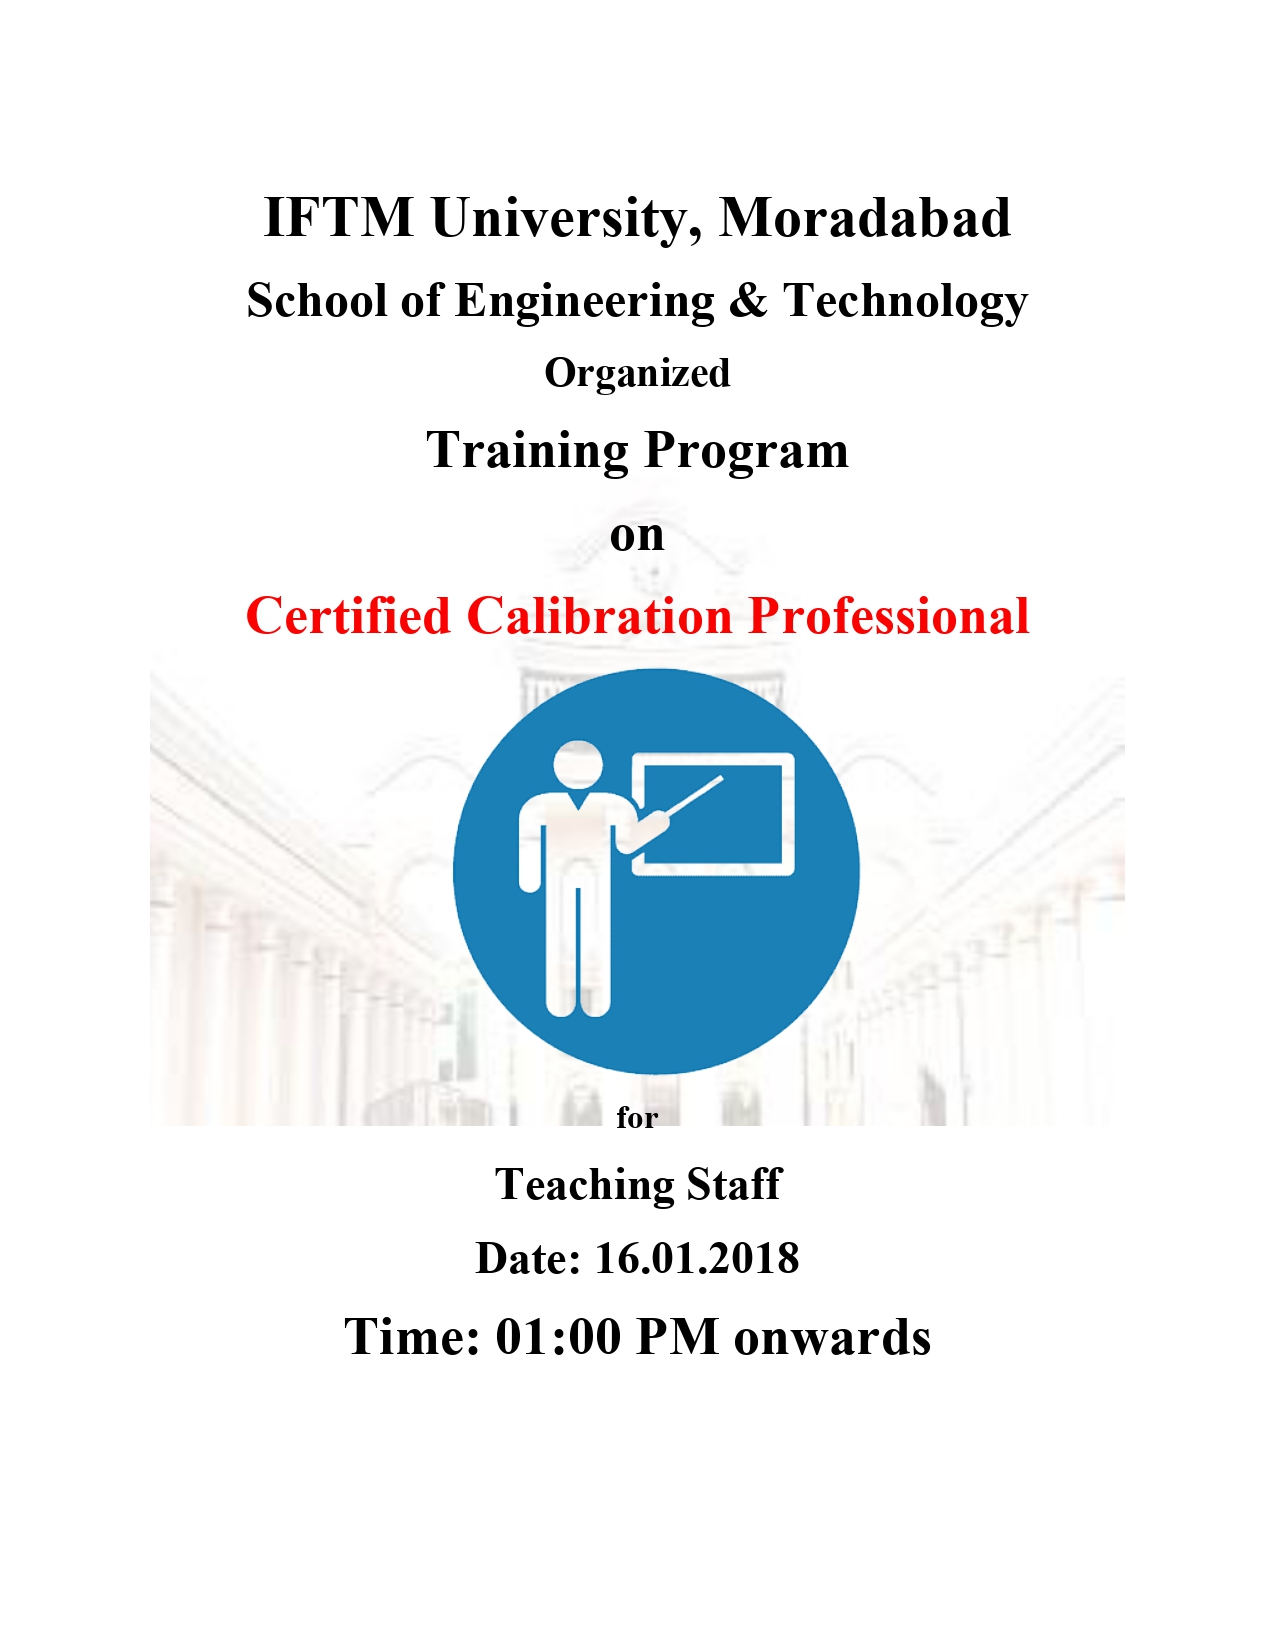 A Training Programme on  Training on Certified Calibration Professional for non-teaching staff